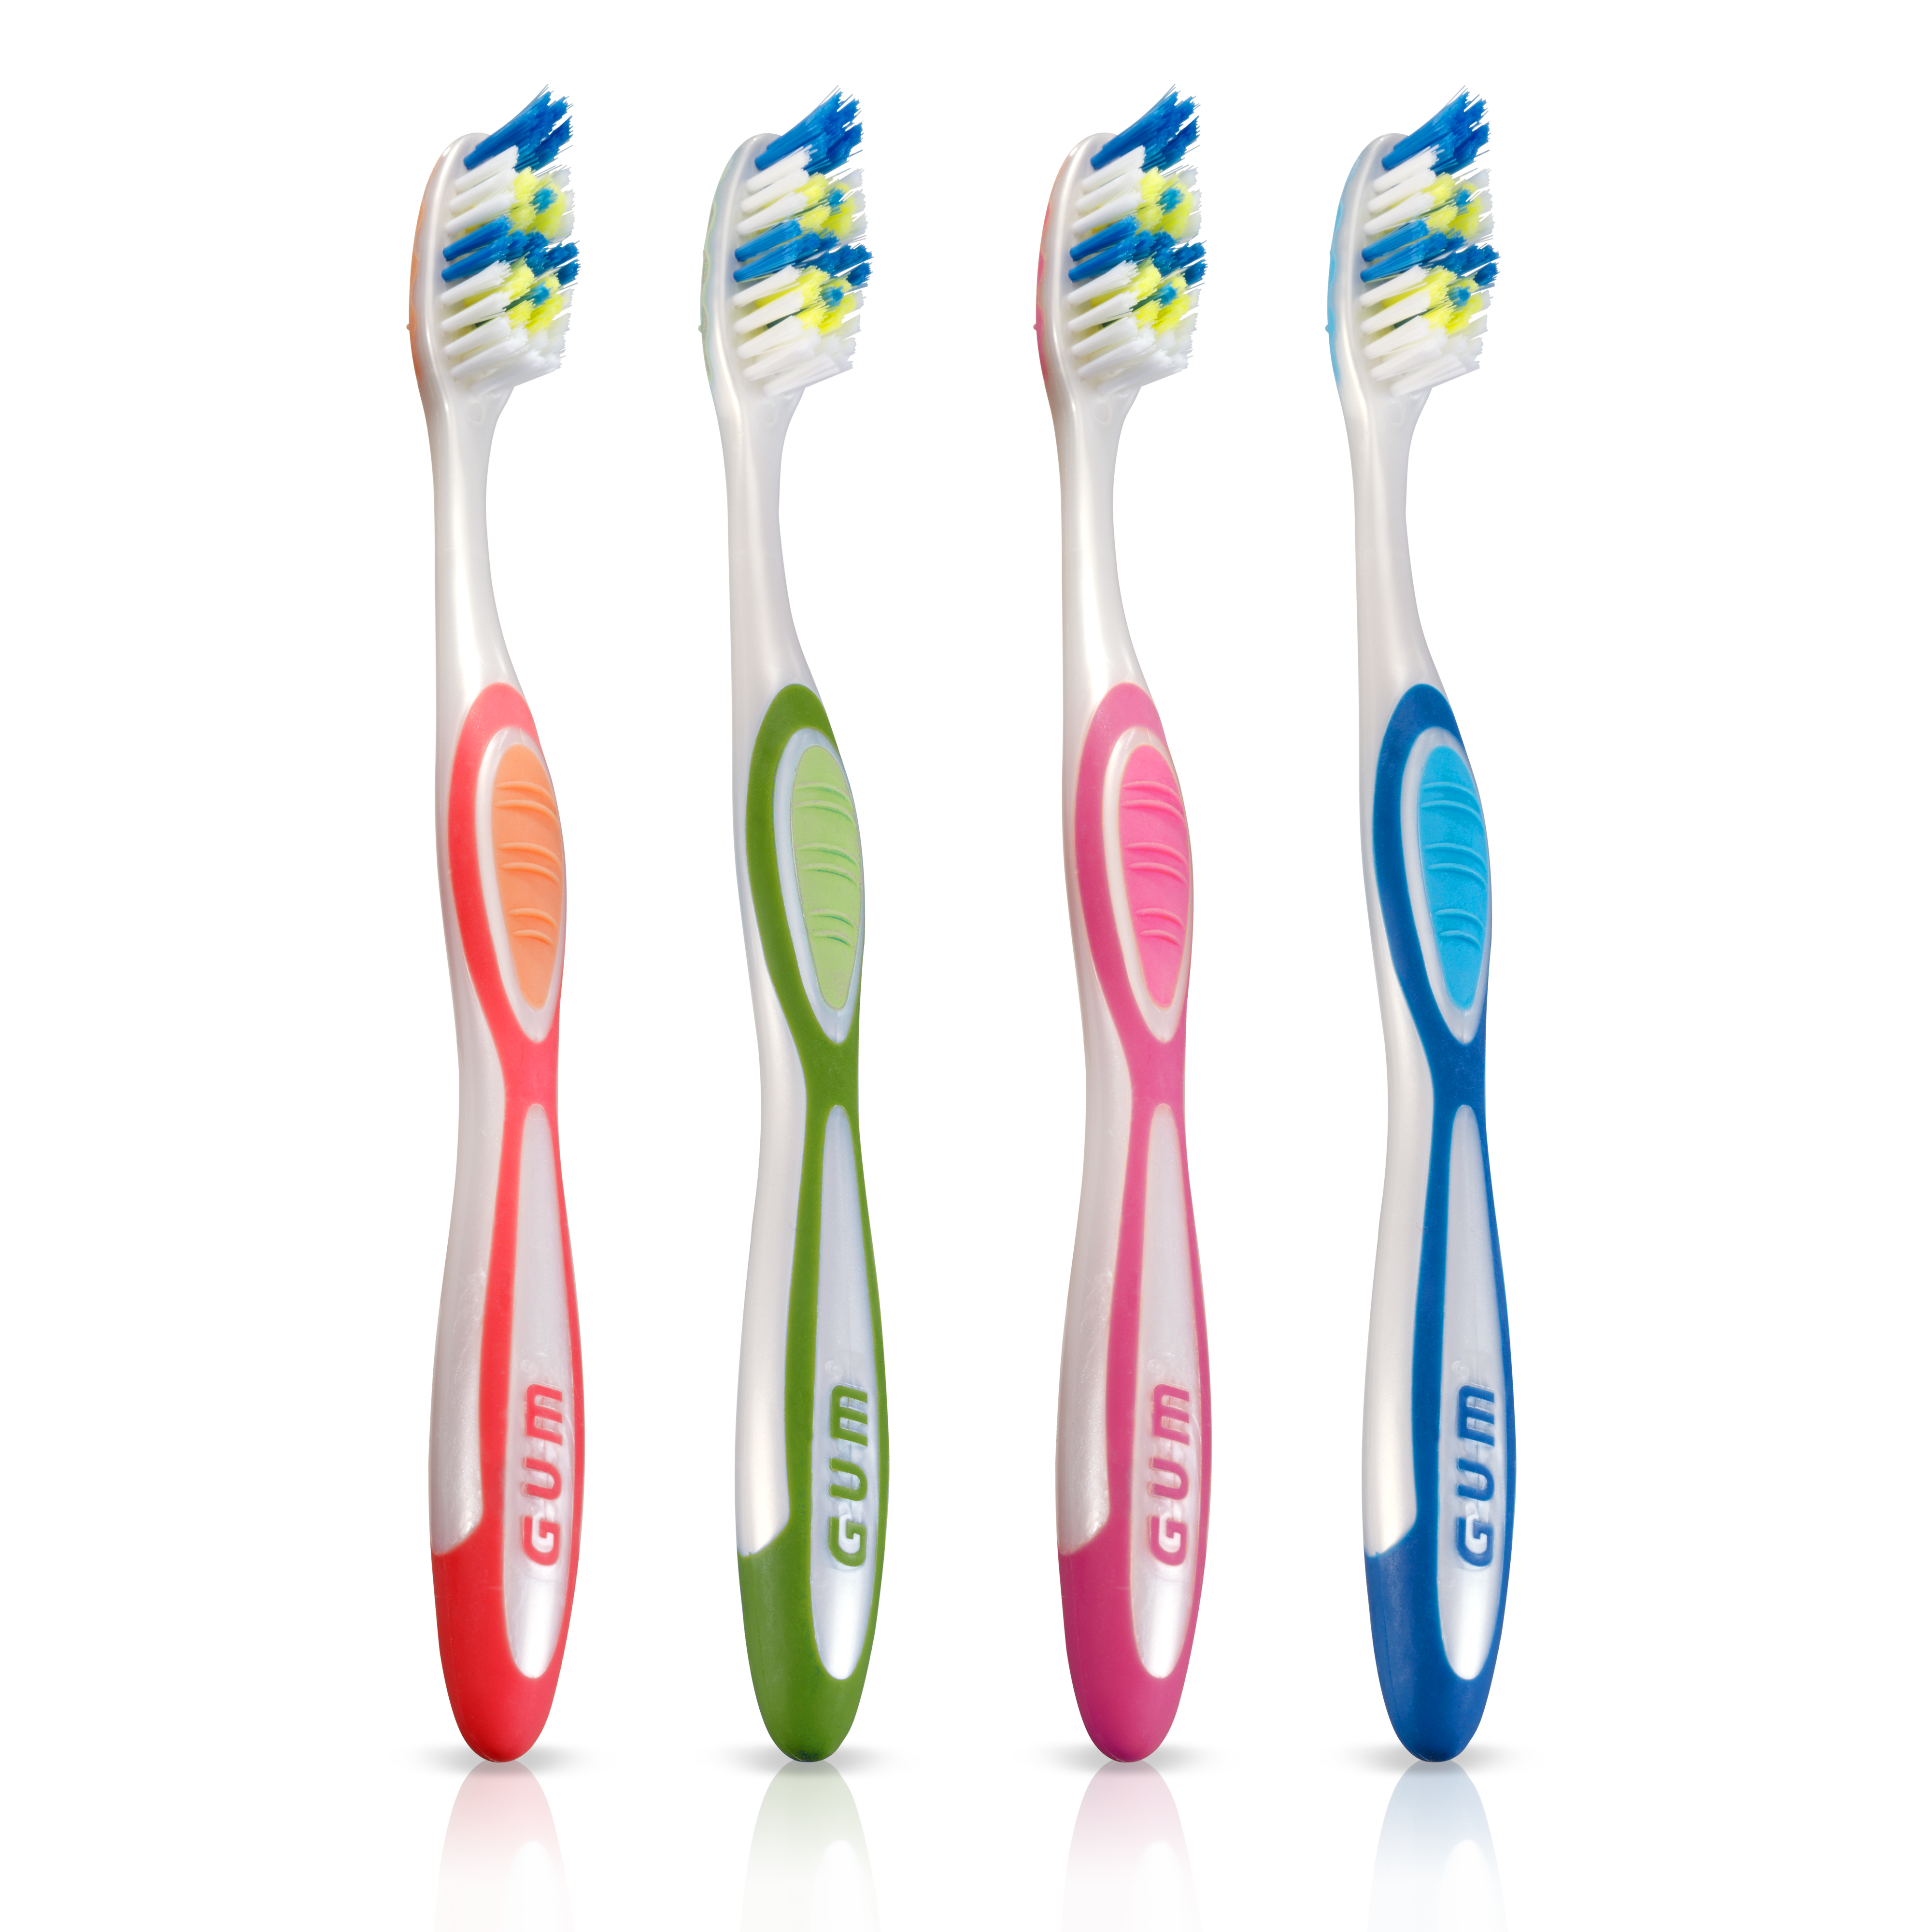 394-396-Product-Toothbrush-Manual-ToothnTongue-naked-4colors.png 